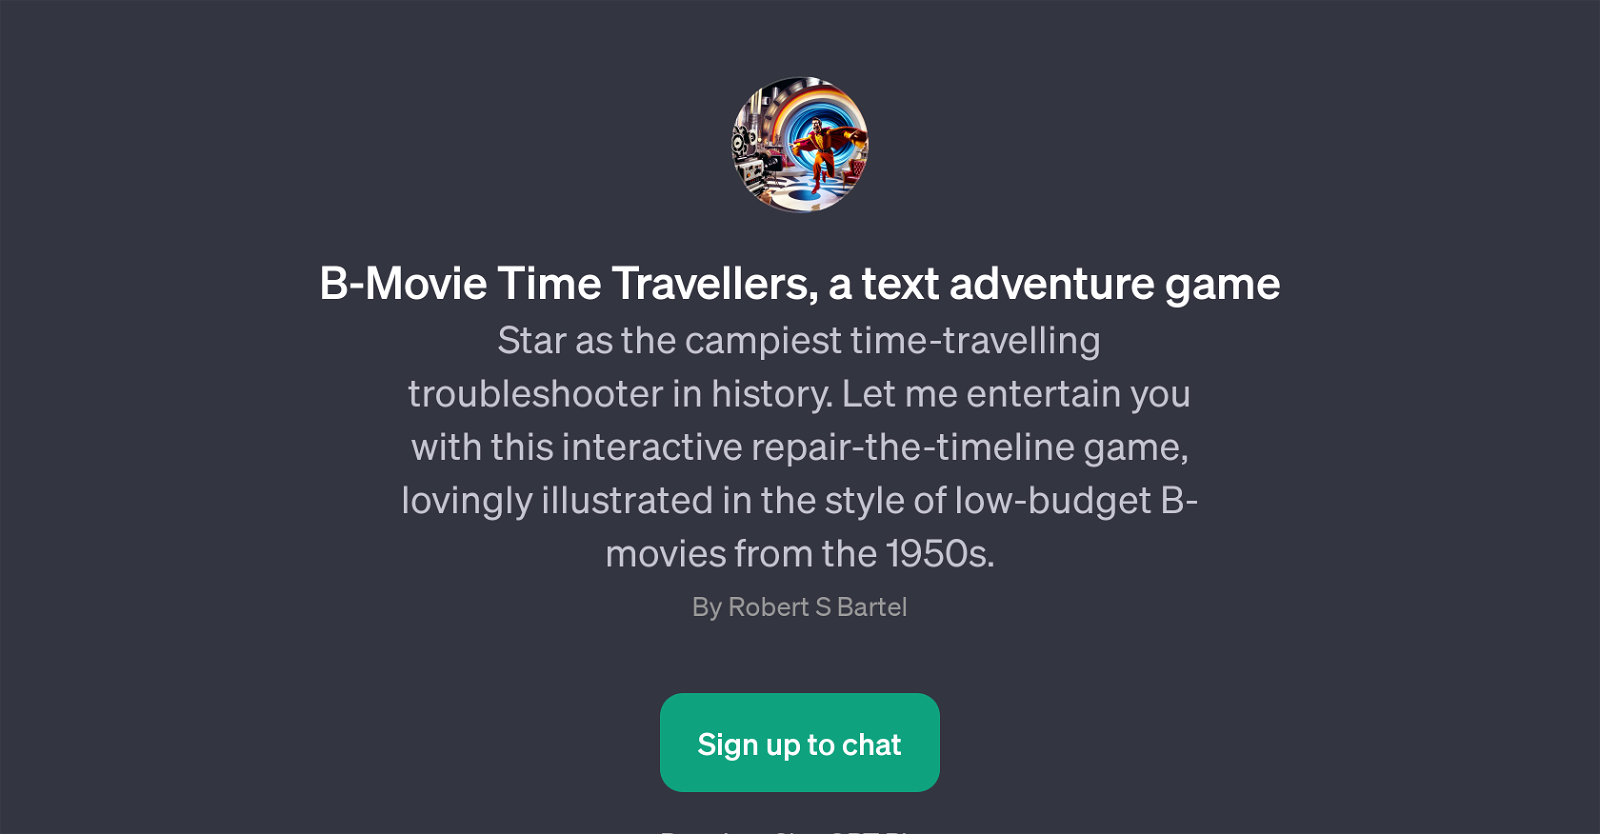 B-Movie Time Travellers, a text adventure game website